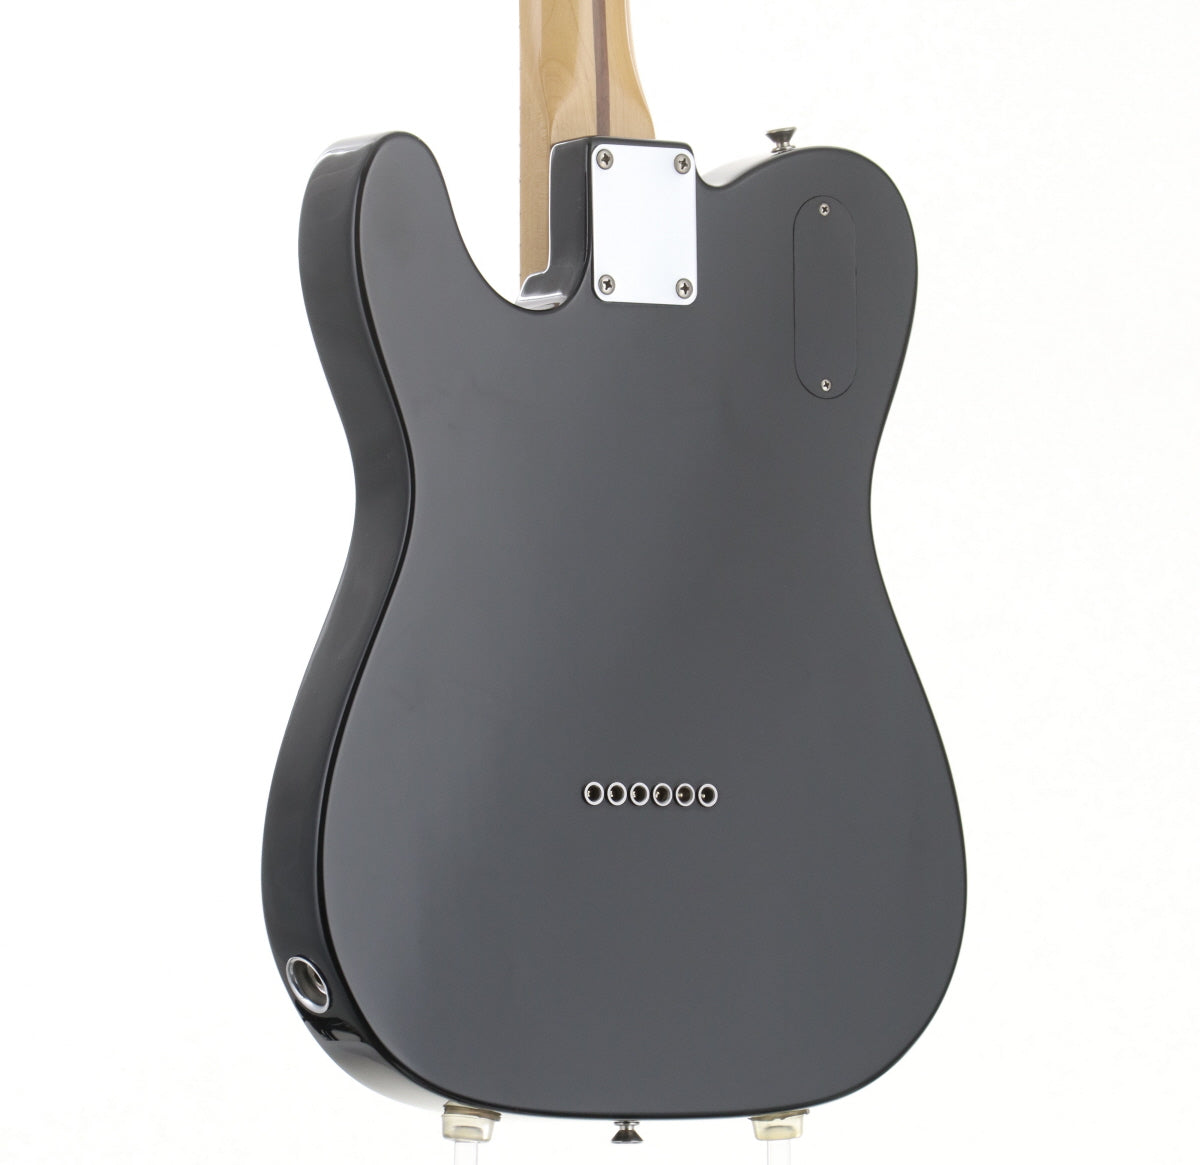 [SN MX11177082] USED Fender Mexico / Classic Player Telecaster Thinline Deluxe Black [06]